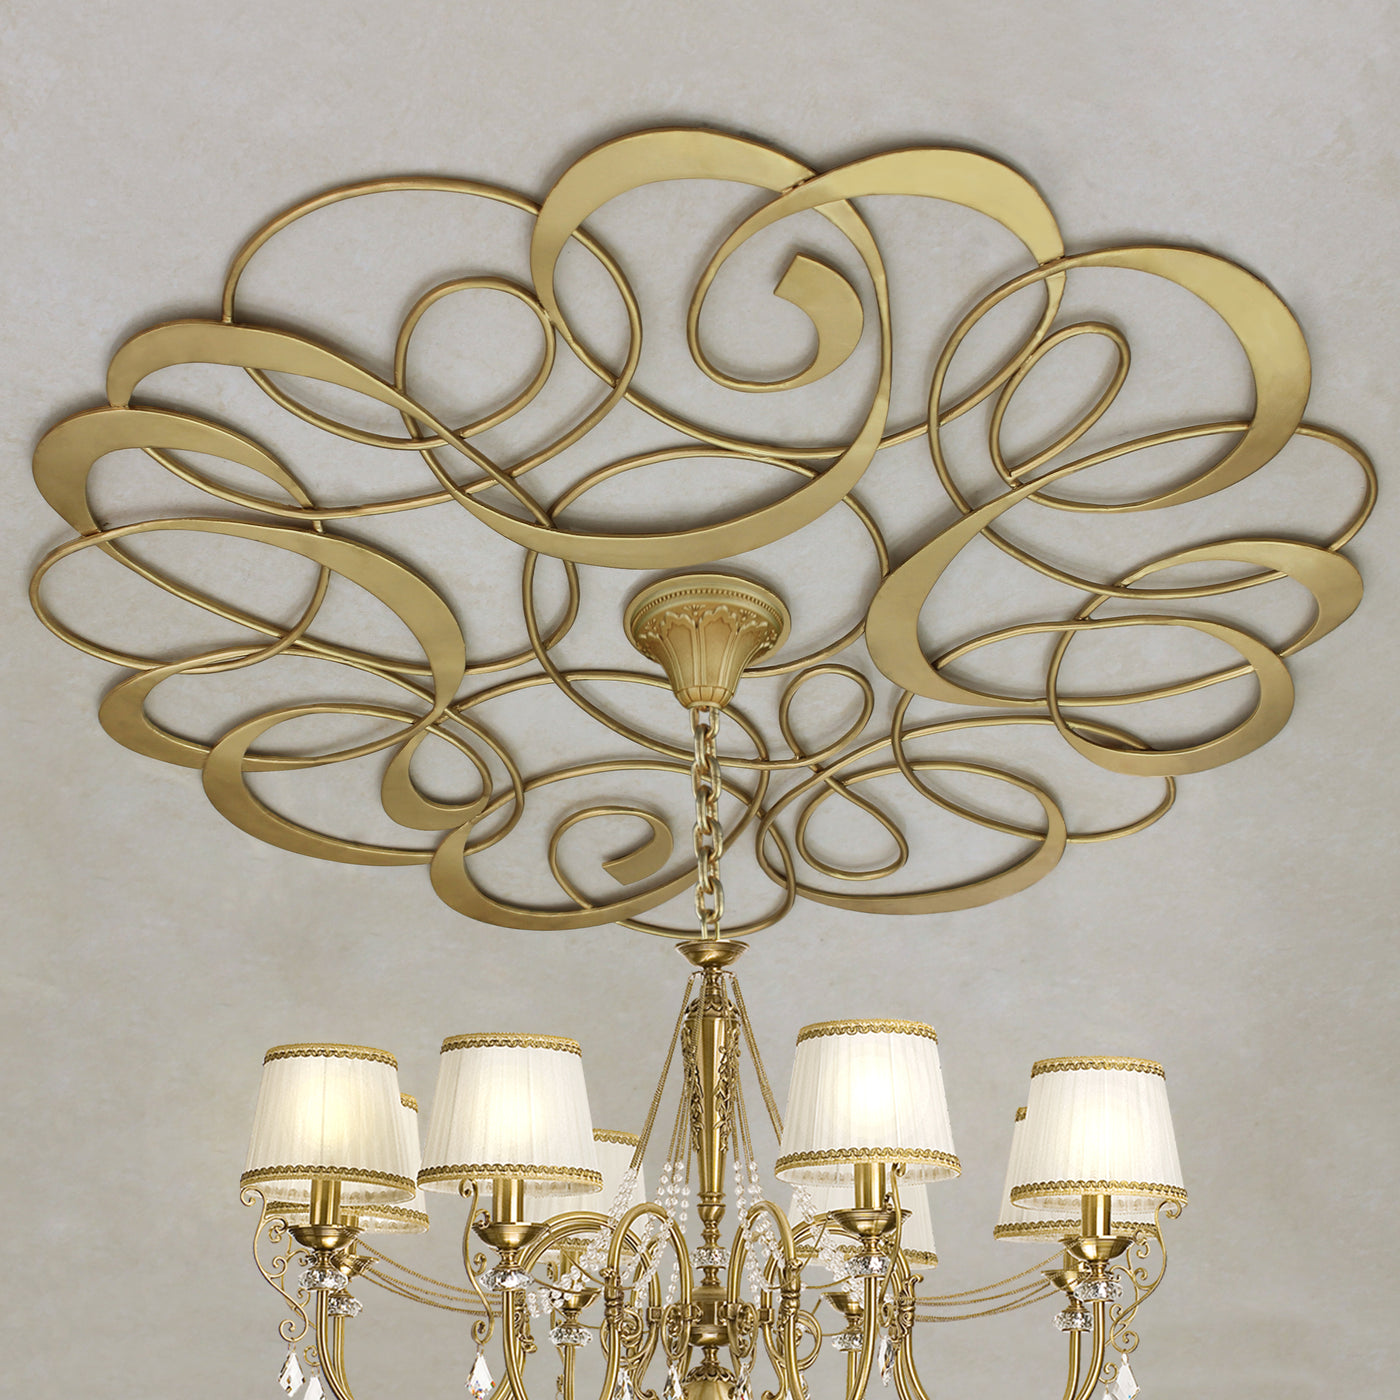 Decorative metal ceiling medallion with an organic pattern and a chandelier hanging from the center; painted in a golden finish